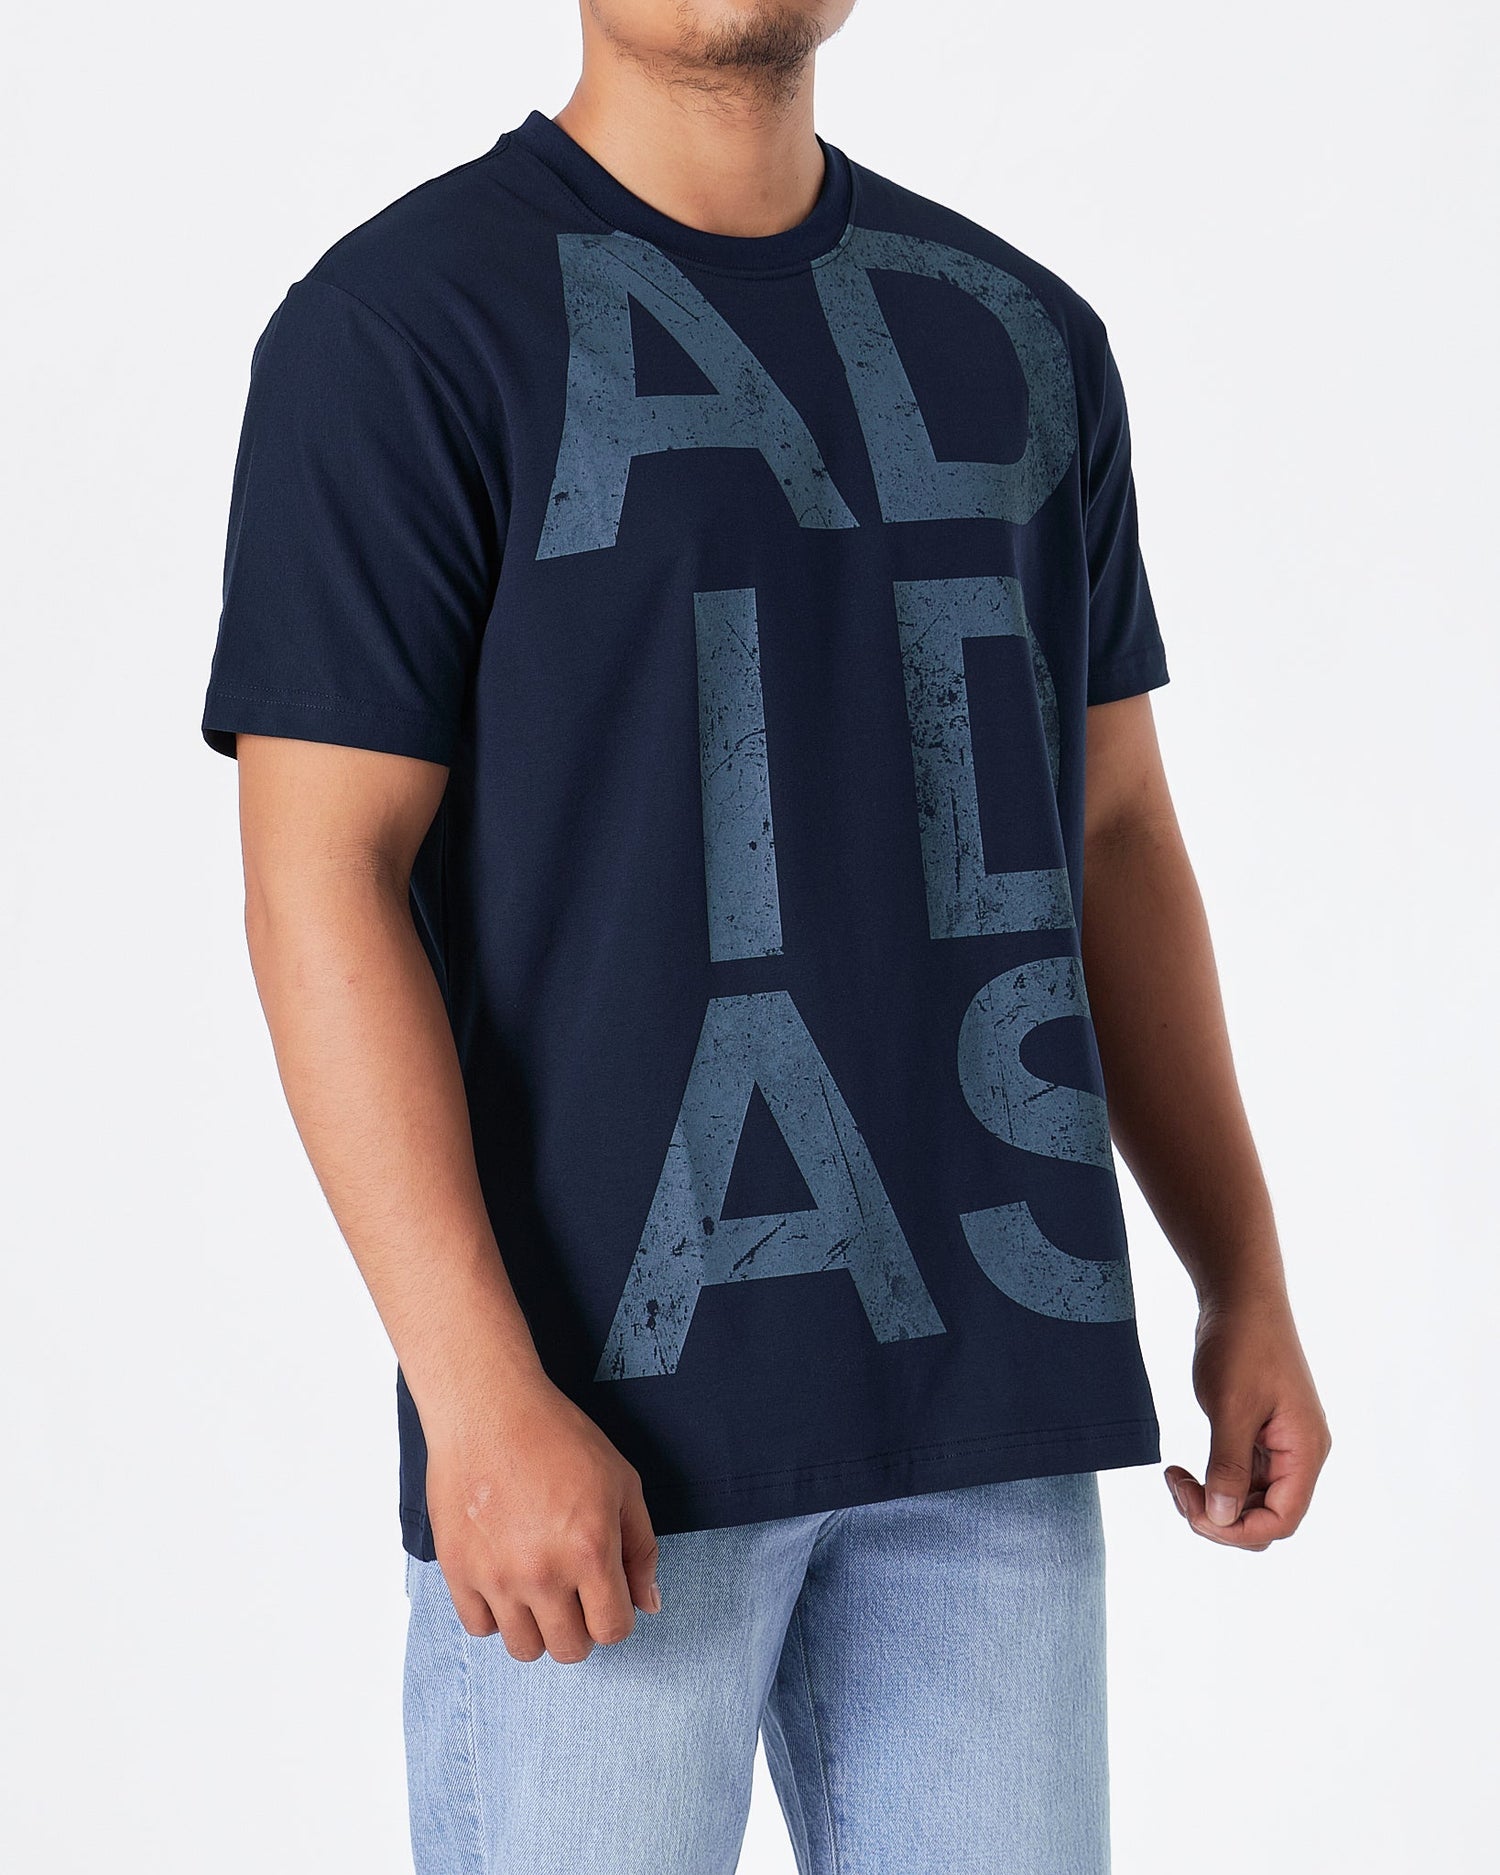 MOI OUTFIT-ADI Graphic Printed Men Blue T-Shirt 15.90